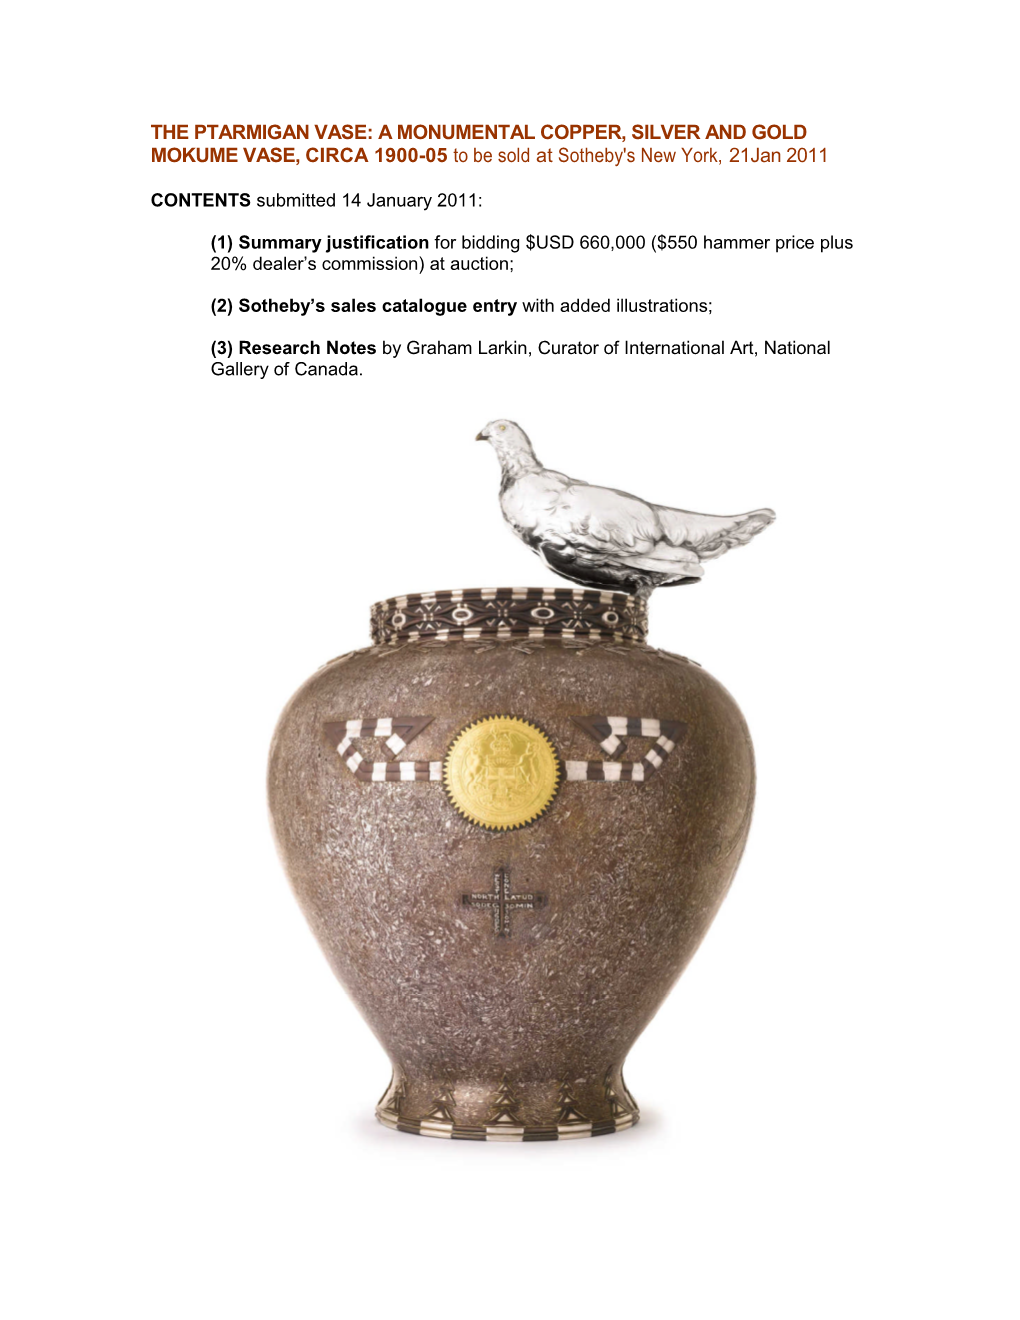 THE PTARMIGAN VASE: a MONUMENTAL COPPER, SILVER and GOLD MOKUME VASE, CIRCA 1900-05 to Be Sold at Sotheby's New York, 21Jan 2011